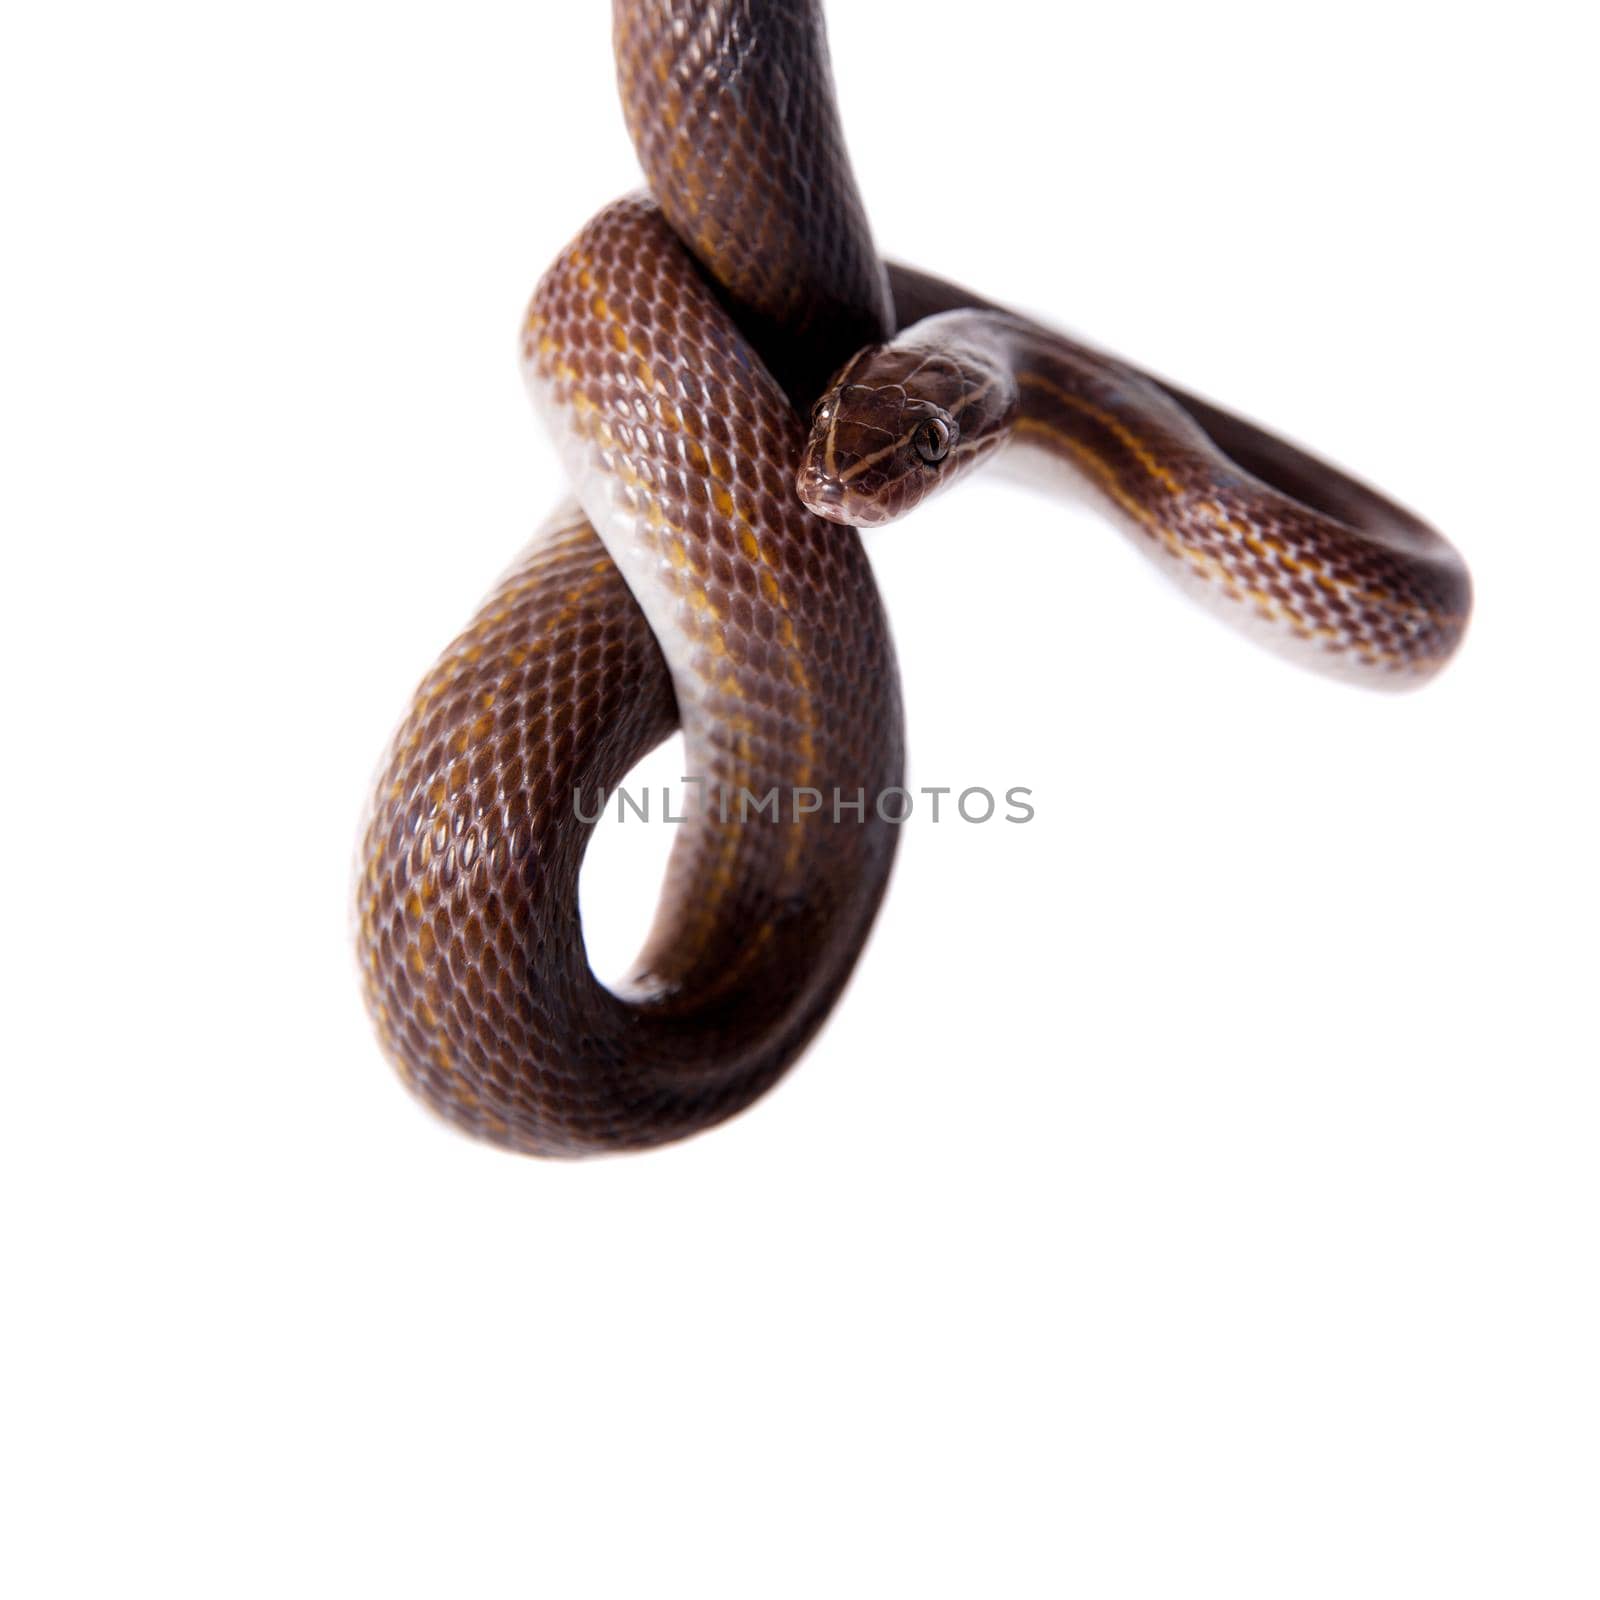 Striped House Snake on white background by RosaJay